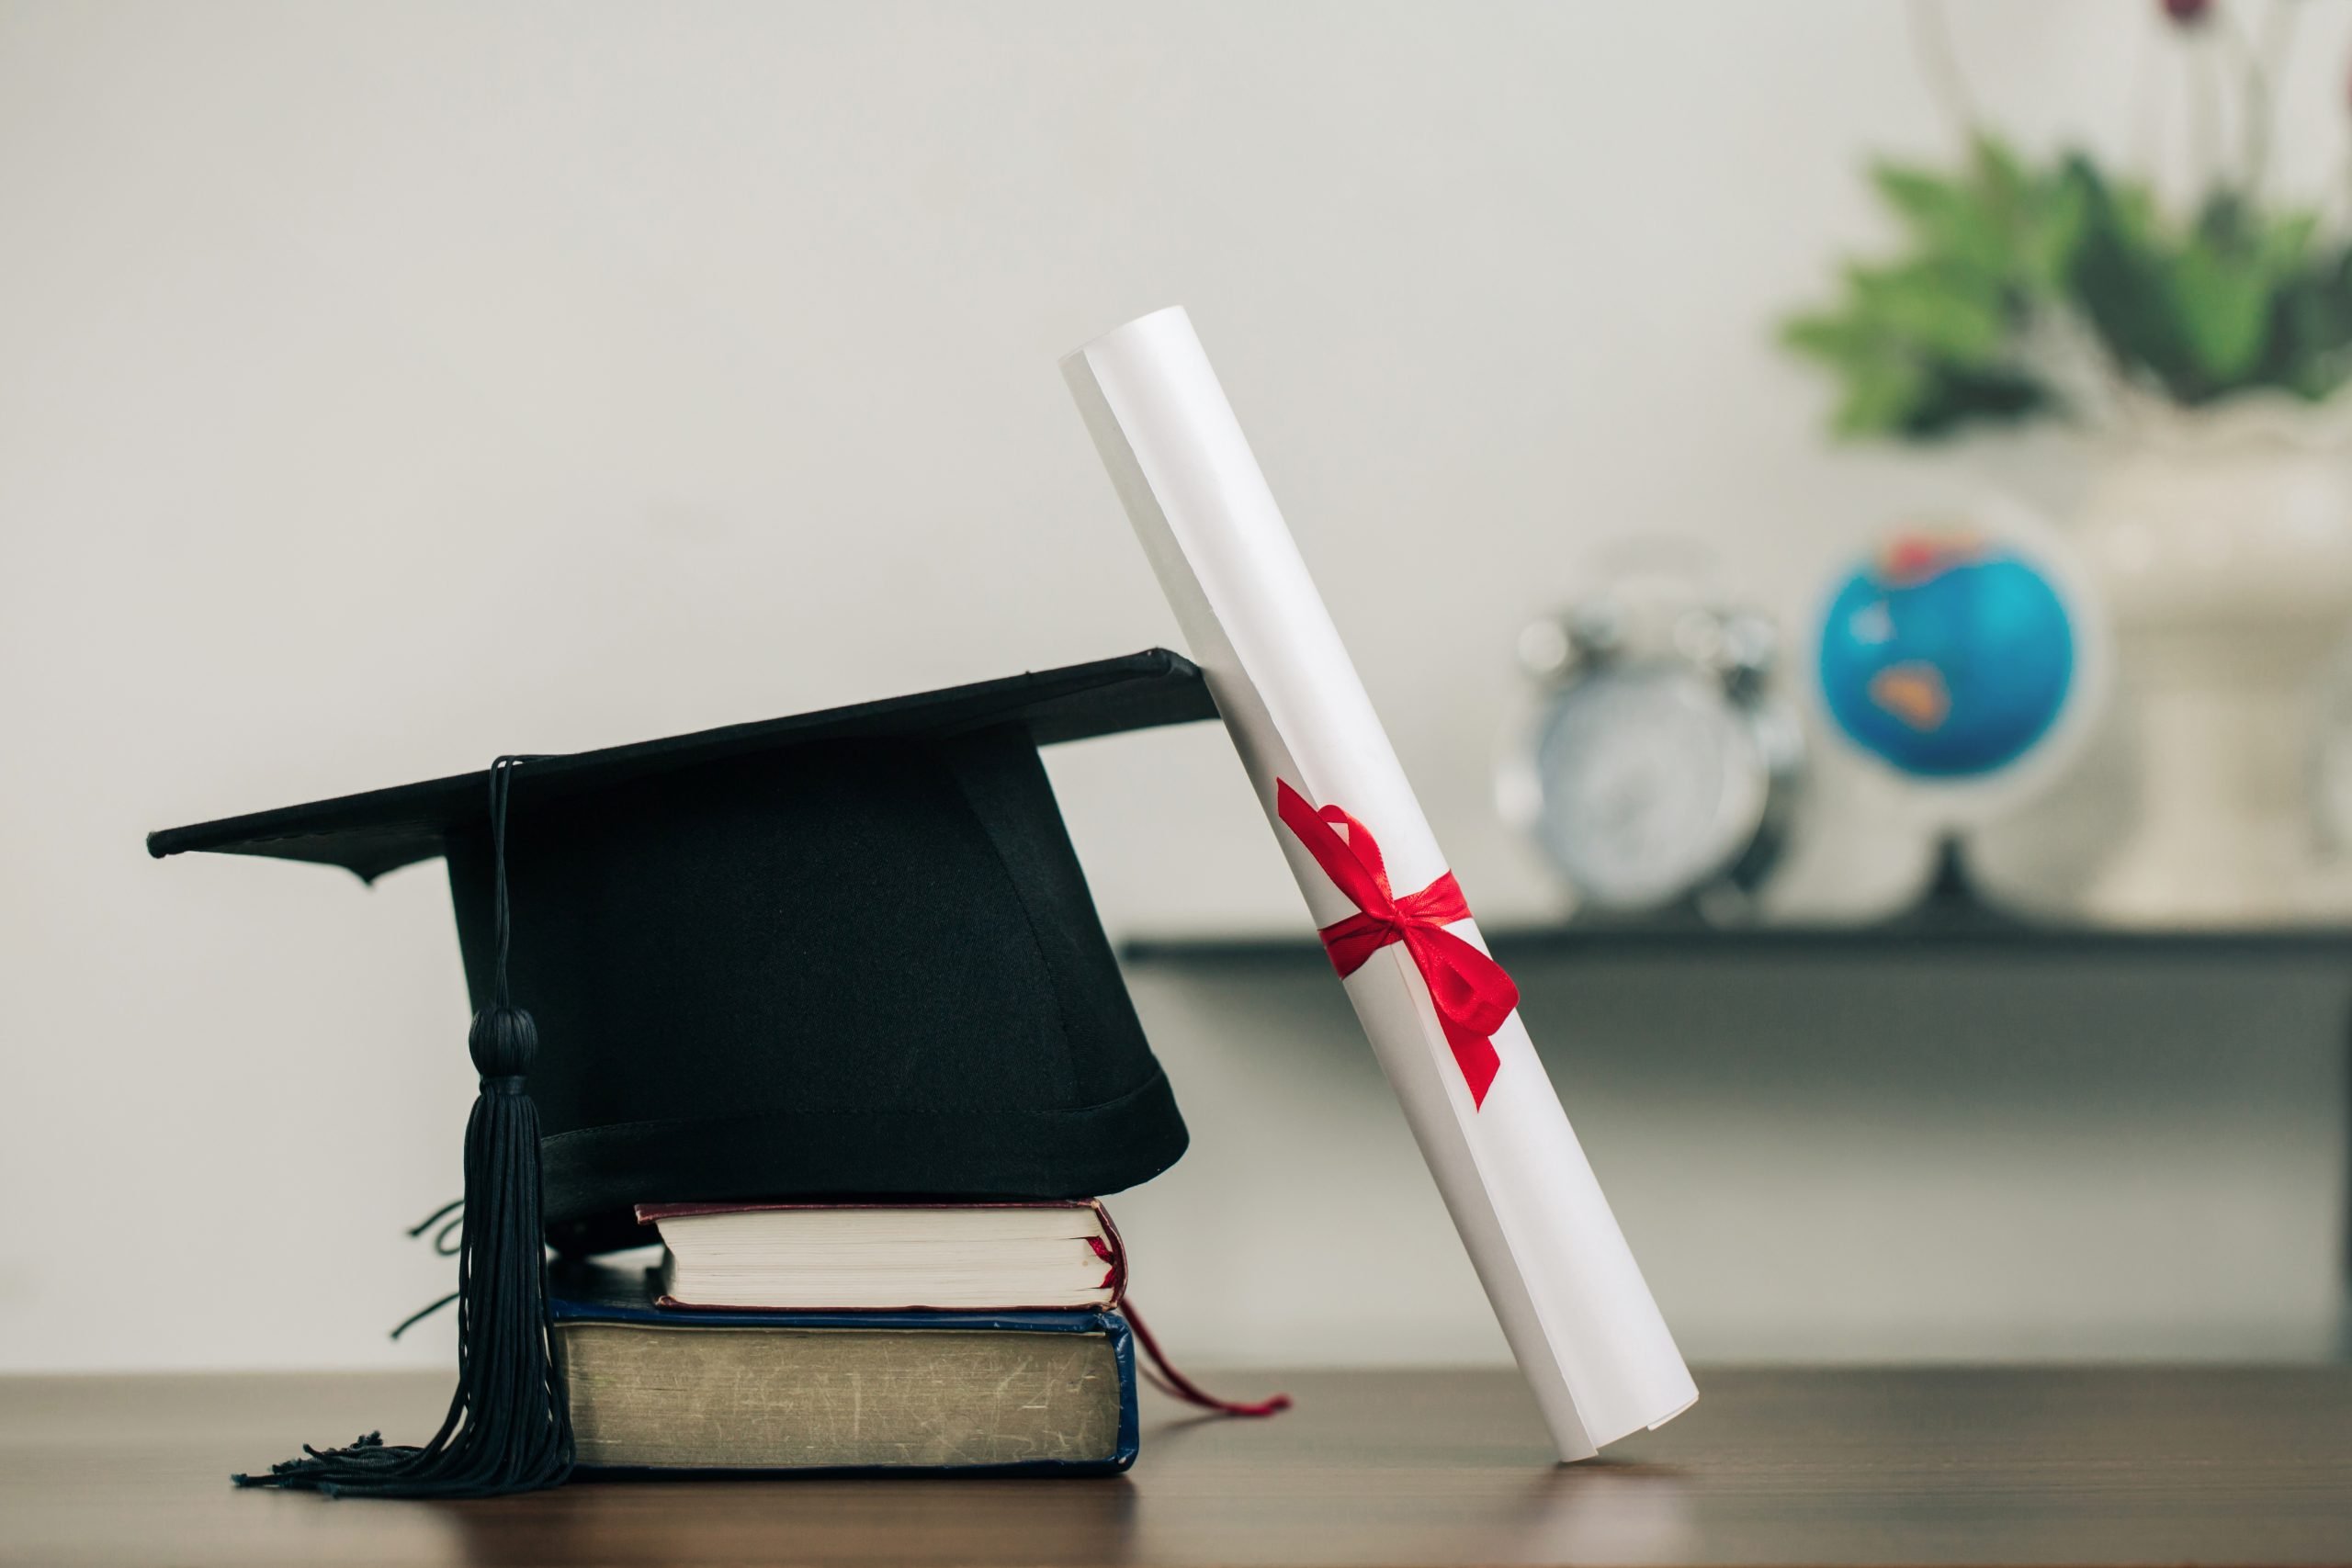 A mortarboard on books and a graduation scroll on the desk.education learning concept